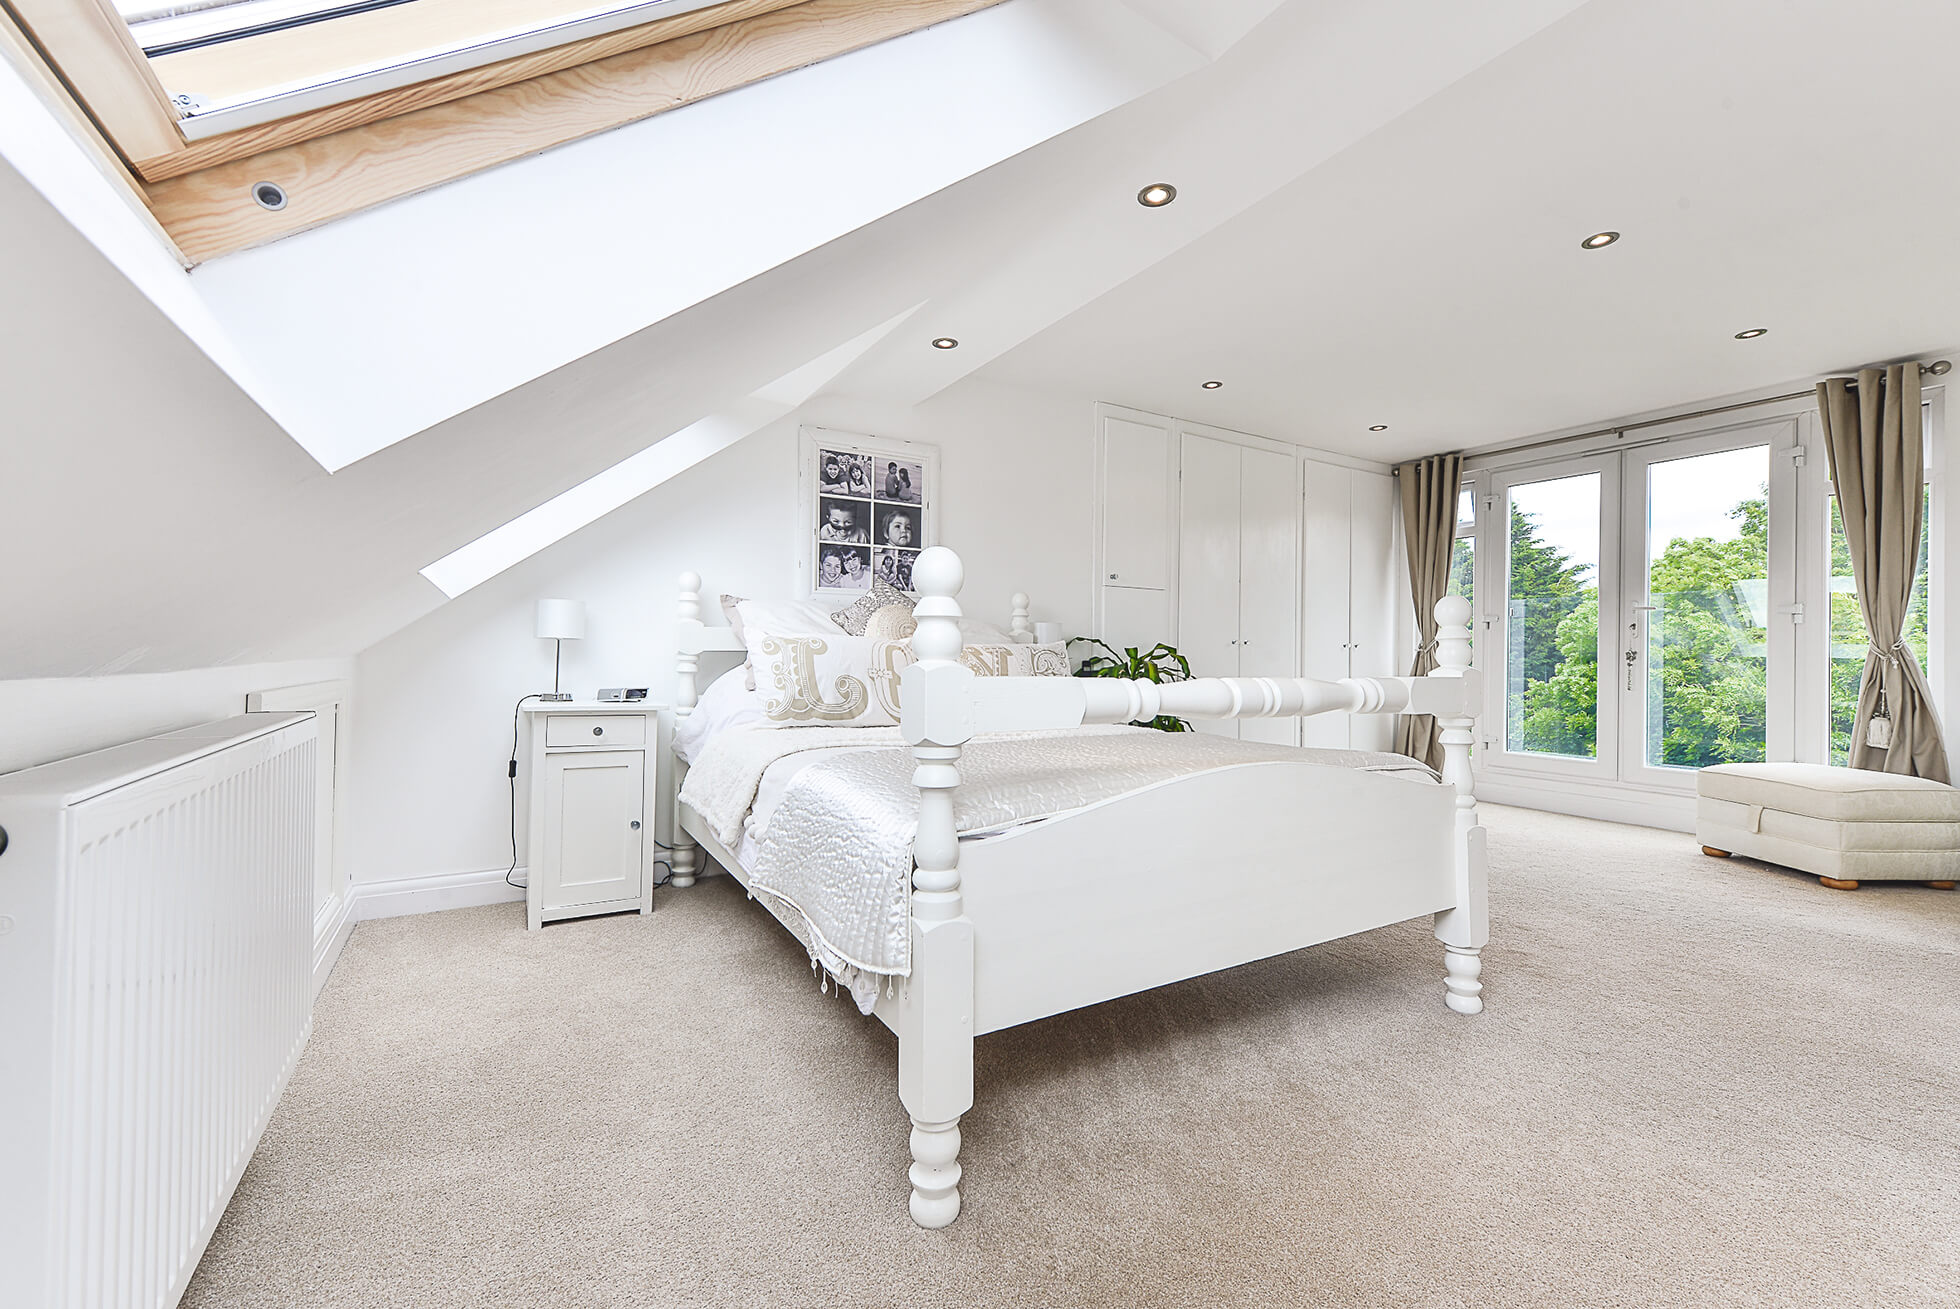 Do you have a question about converting your Loft in Borehamwood? Here are the most popular questions asked by our clients.